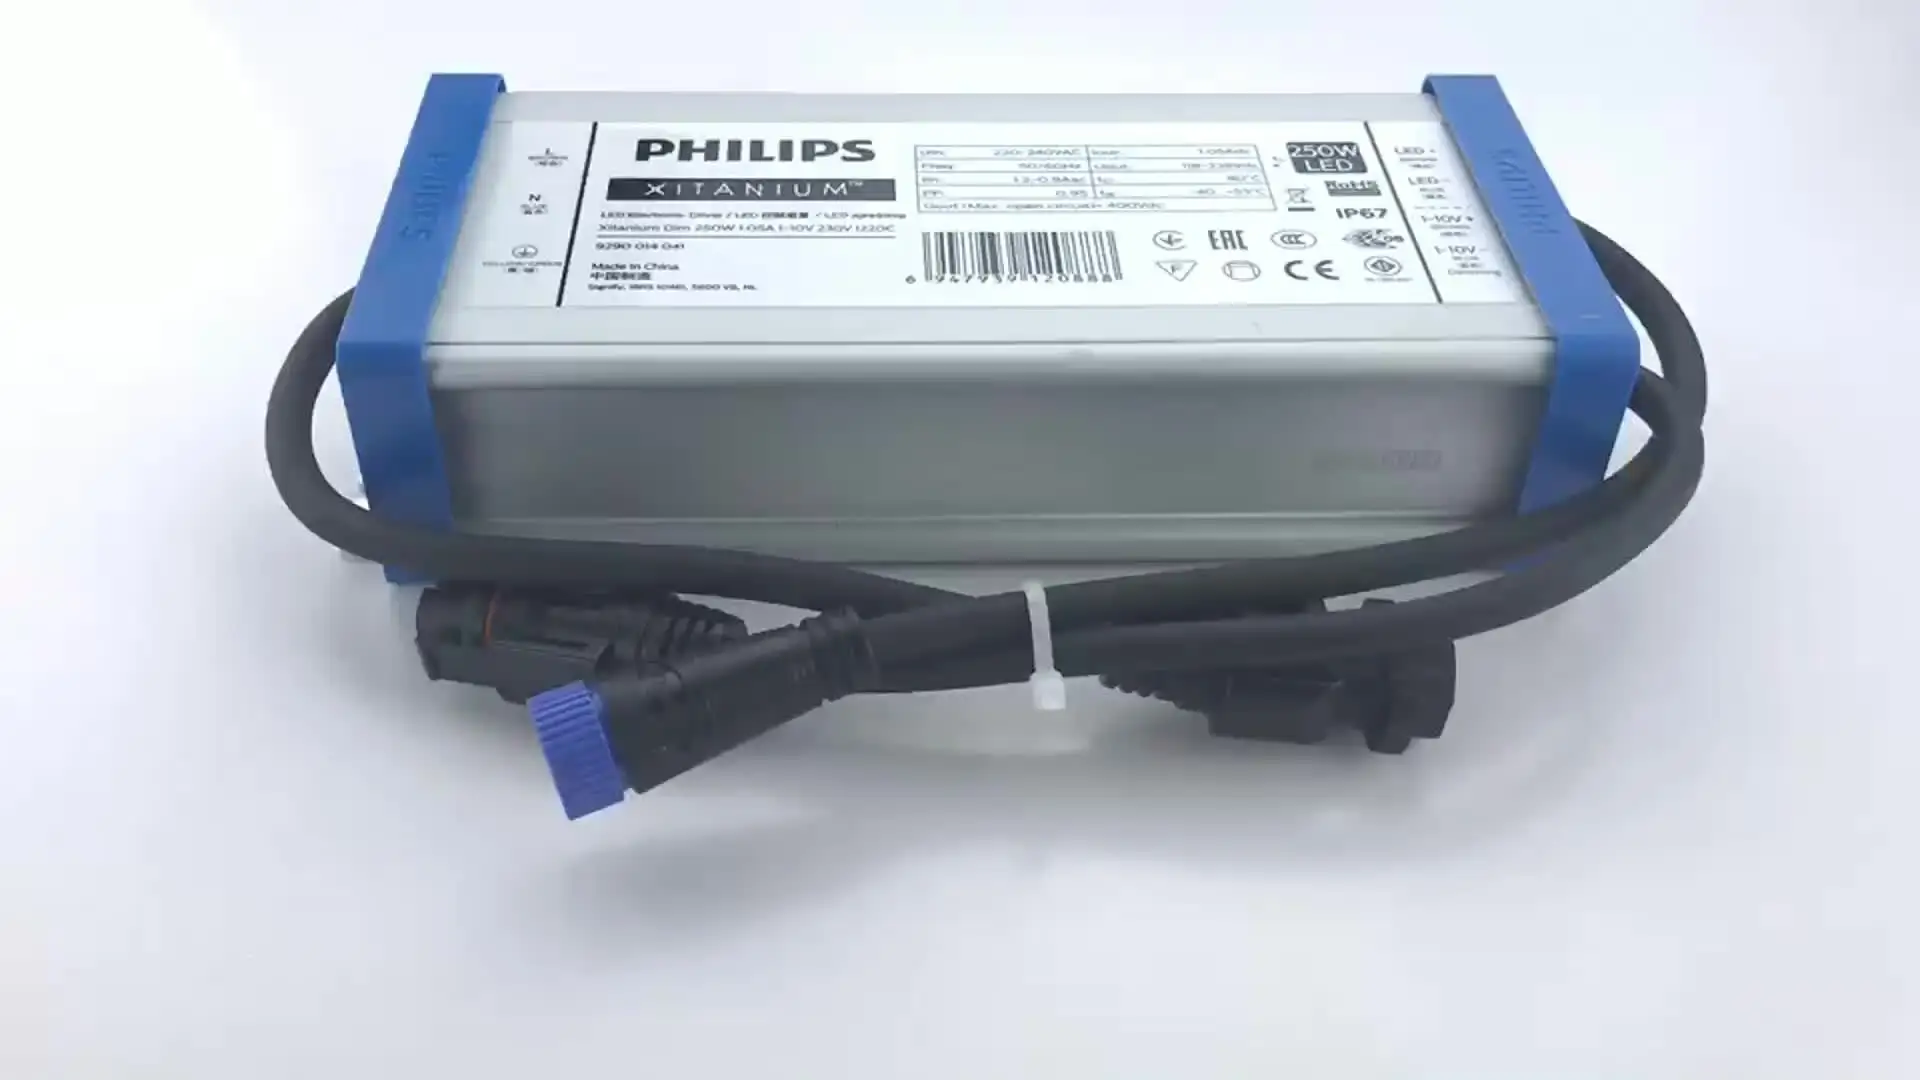 250W 1.05A 230V PHILIPS Outdoor Dimmable LED driver - AliExpress